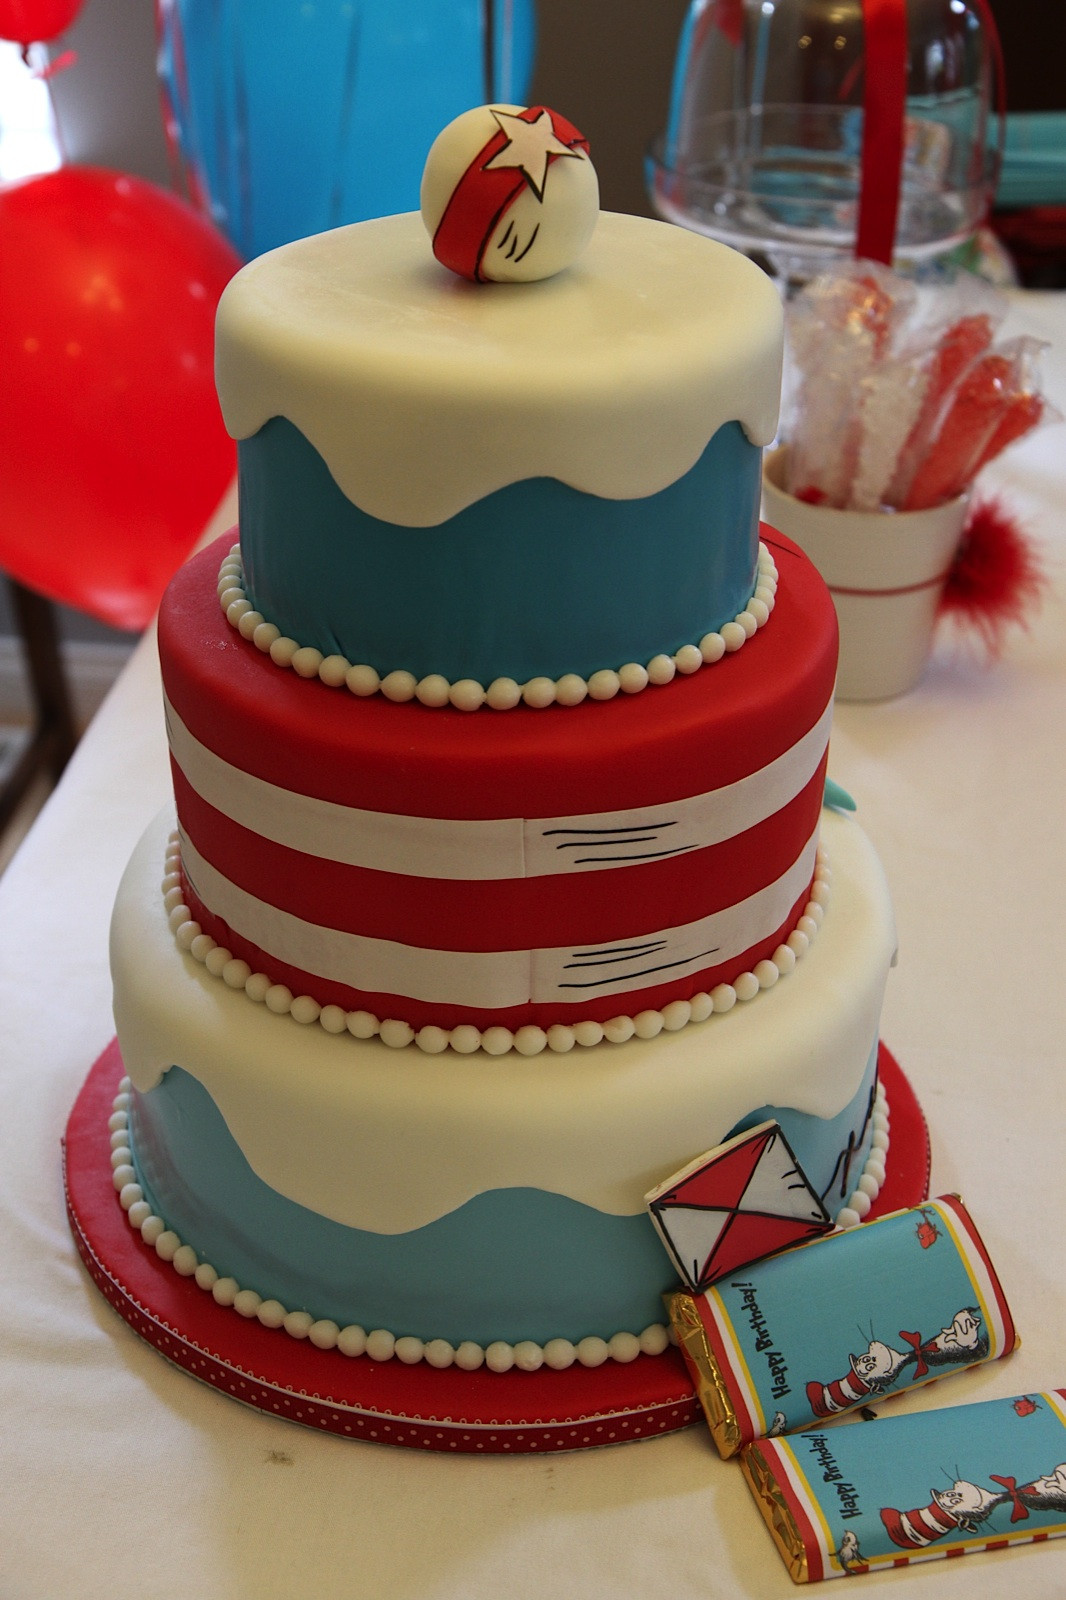 Dr Seuss Birthday Cake
 My Paper lily Parties Galore Dr Seuss parties from